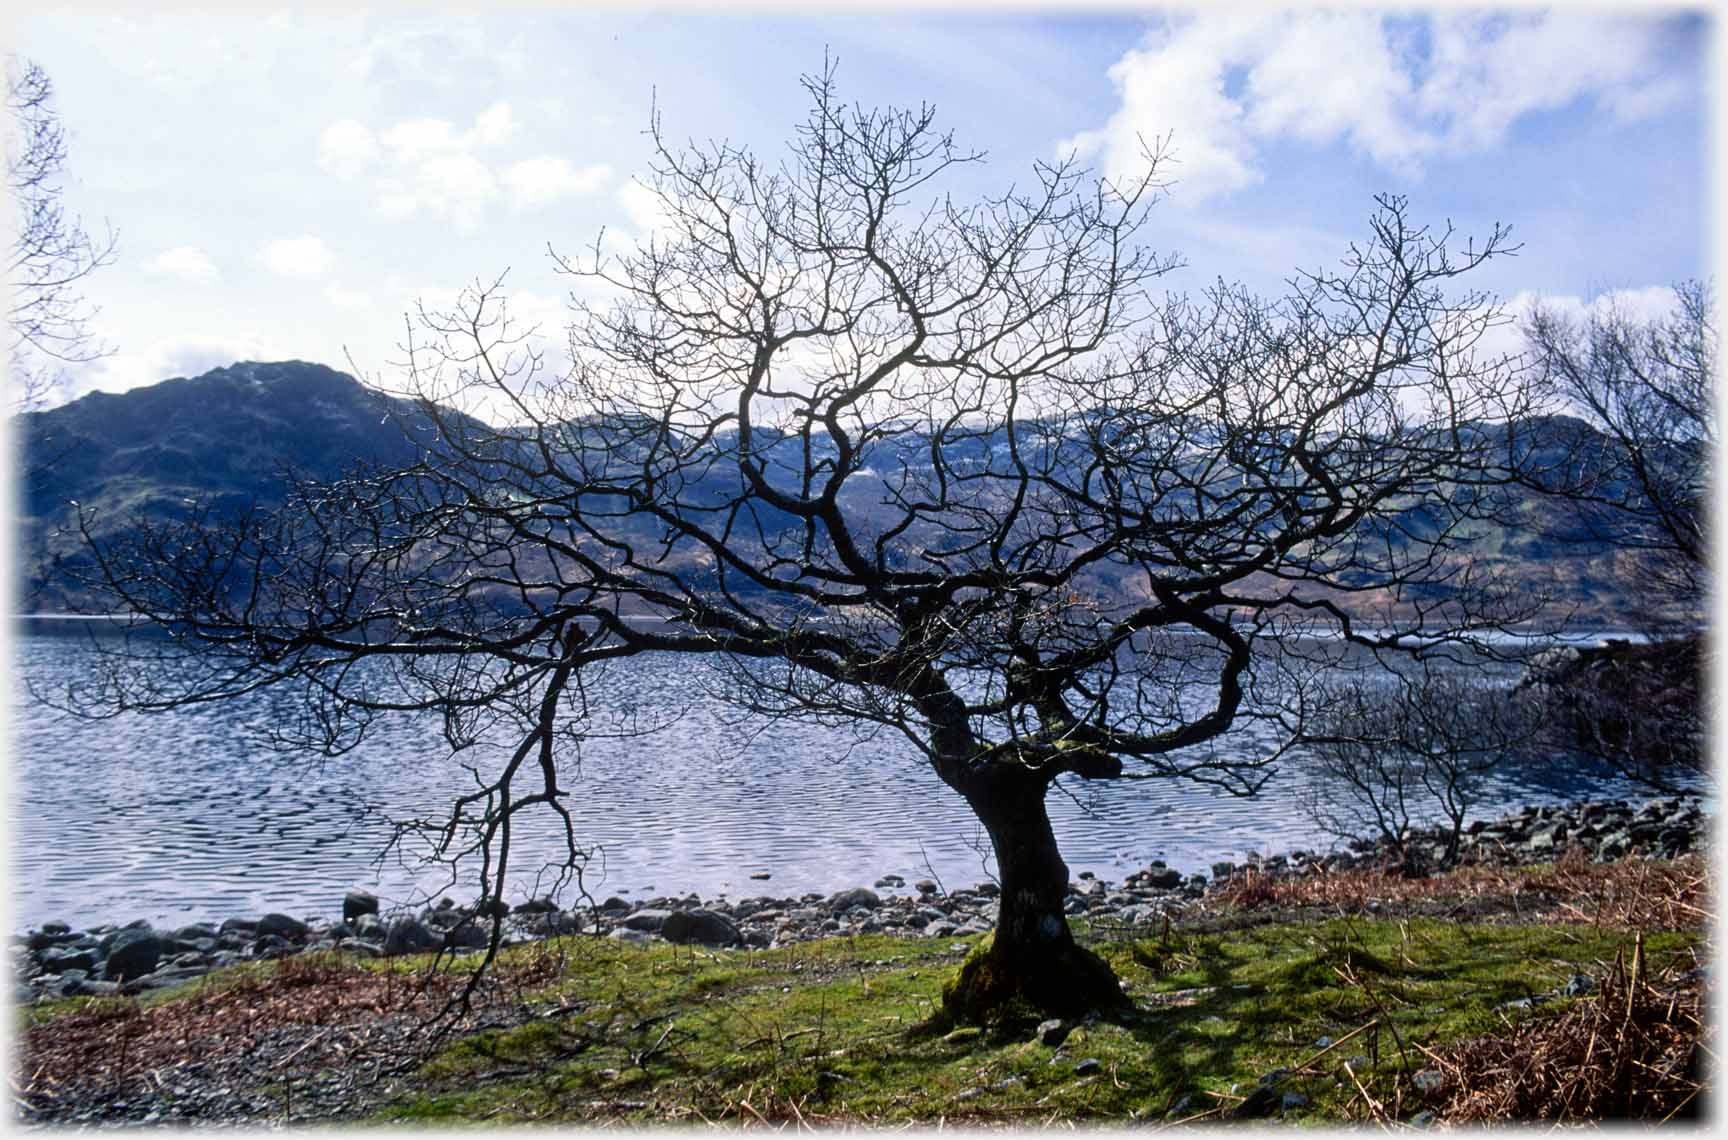 Contorted branches of bare tree with loch beyond.